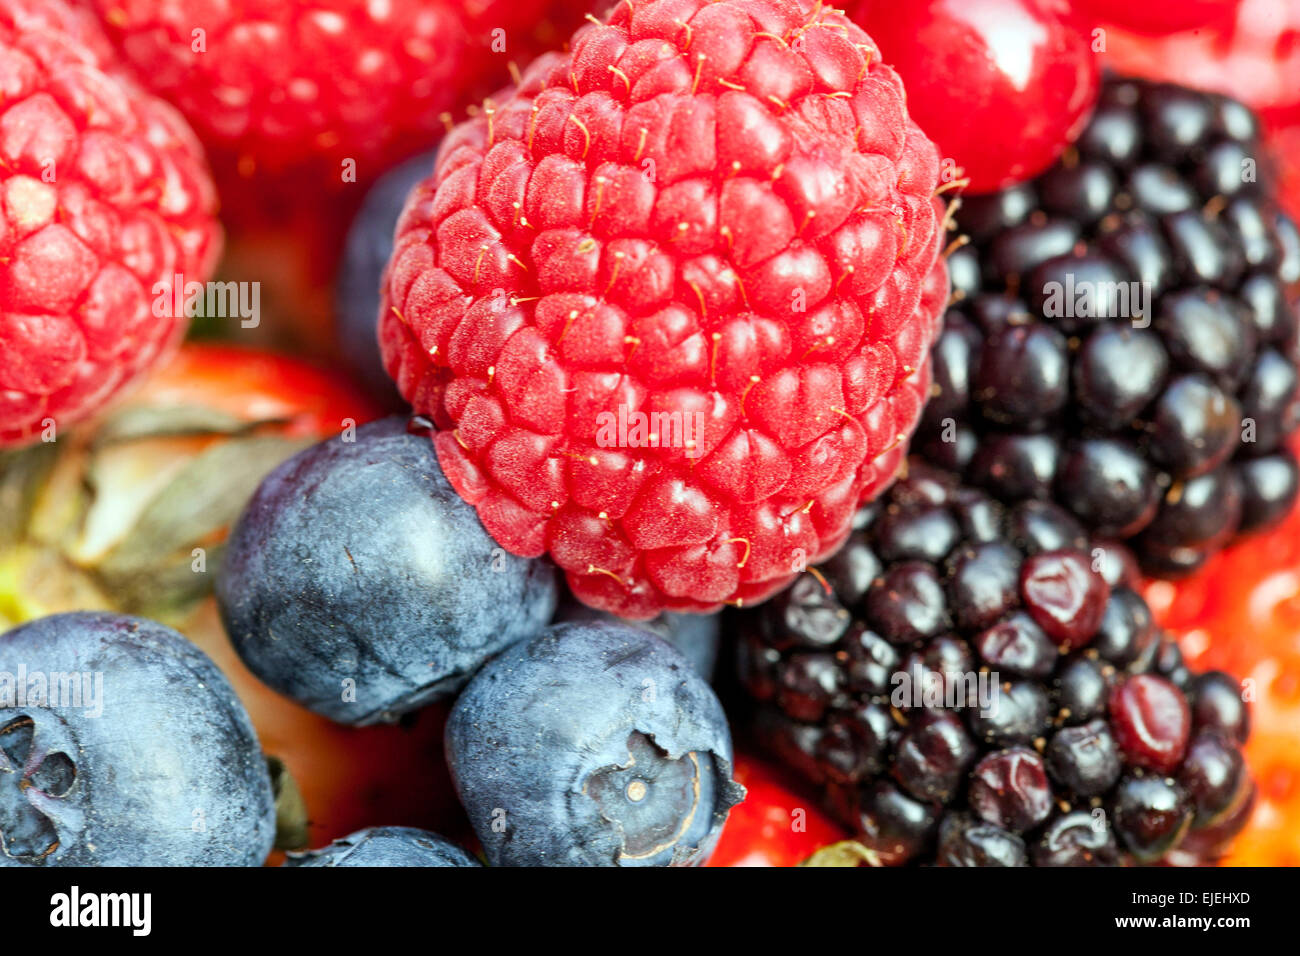 Different colorful berries raspberry blackberry fruits Stock Photo